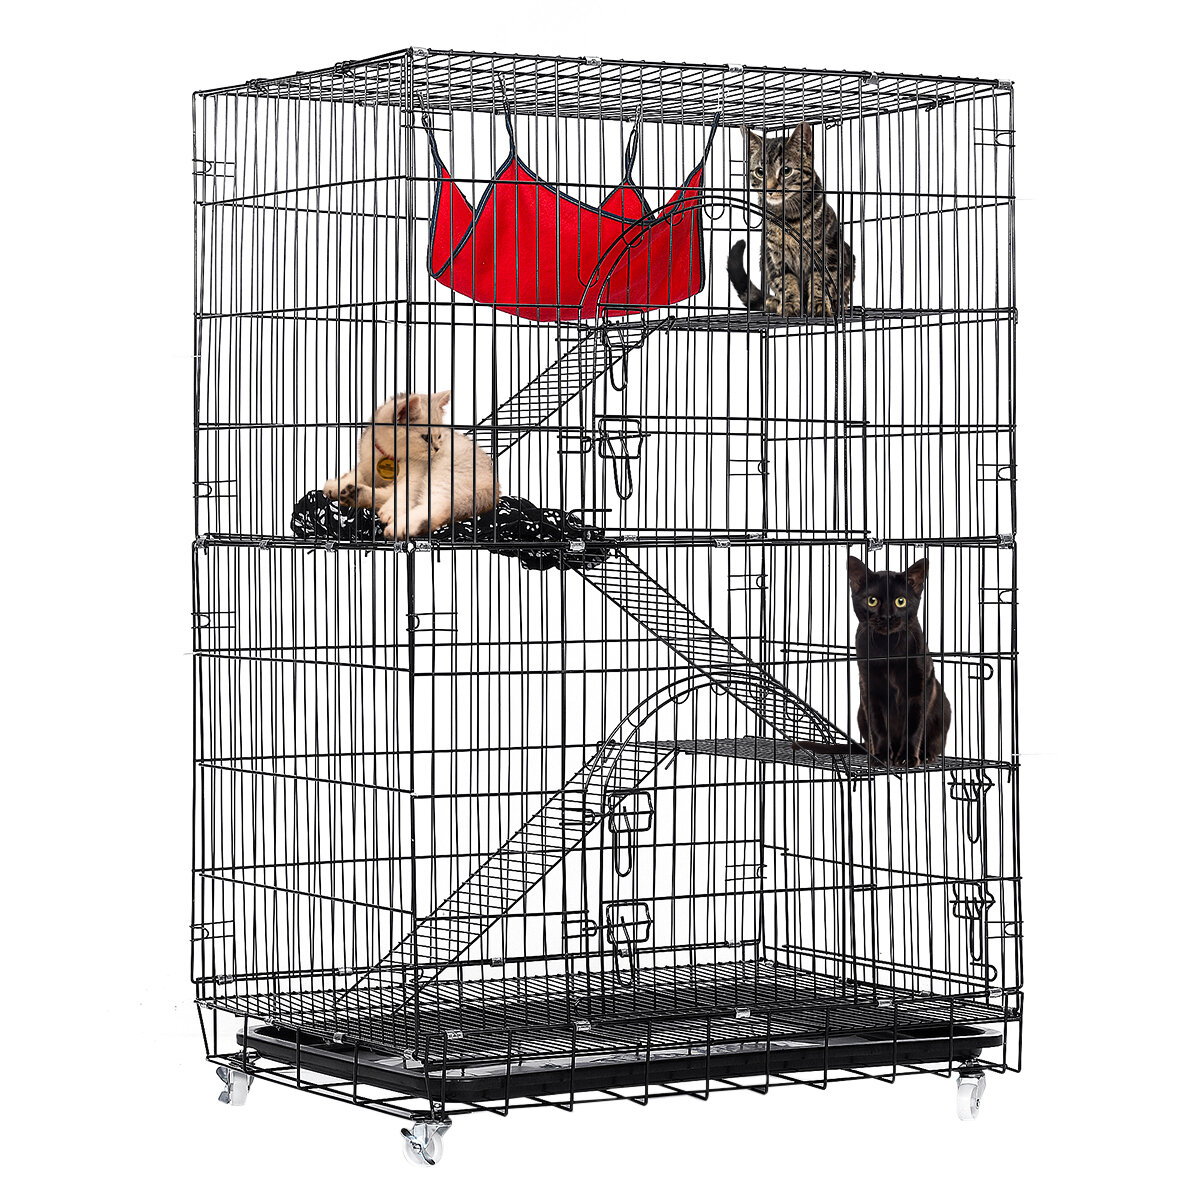 

PawGiant 4-Tier Cat Cage, Cat Playpen Kennel Crate Chinchilla Rat Box Cage Enclosure with Ladders, Platforms Beds, Latch